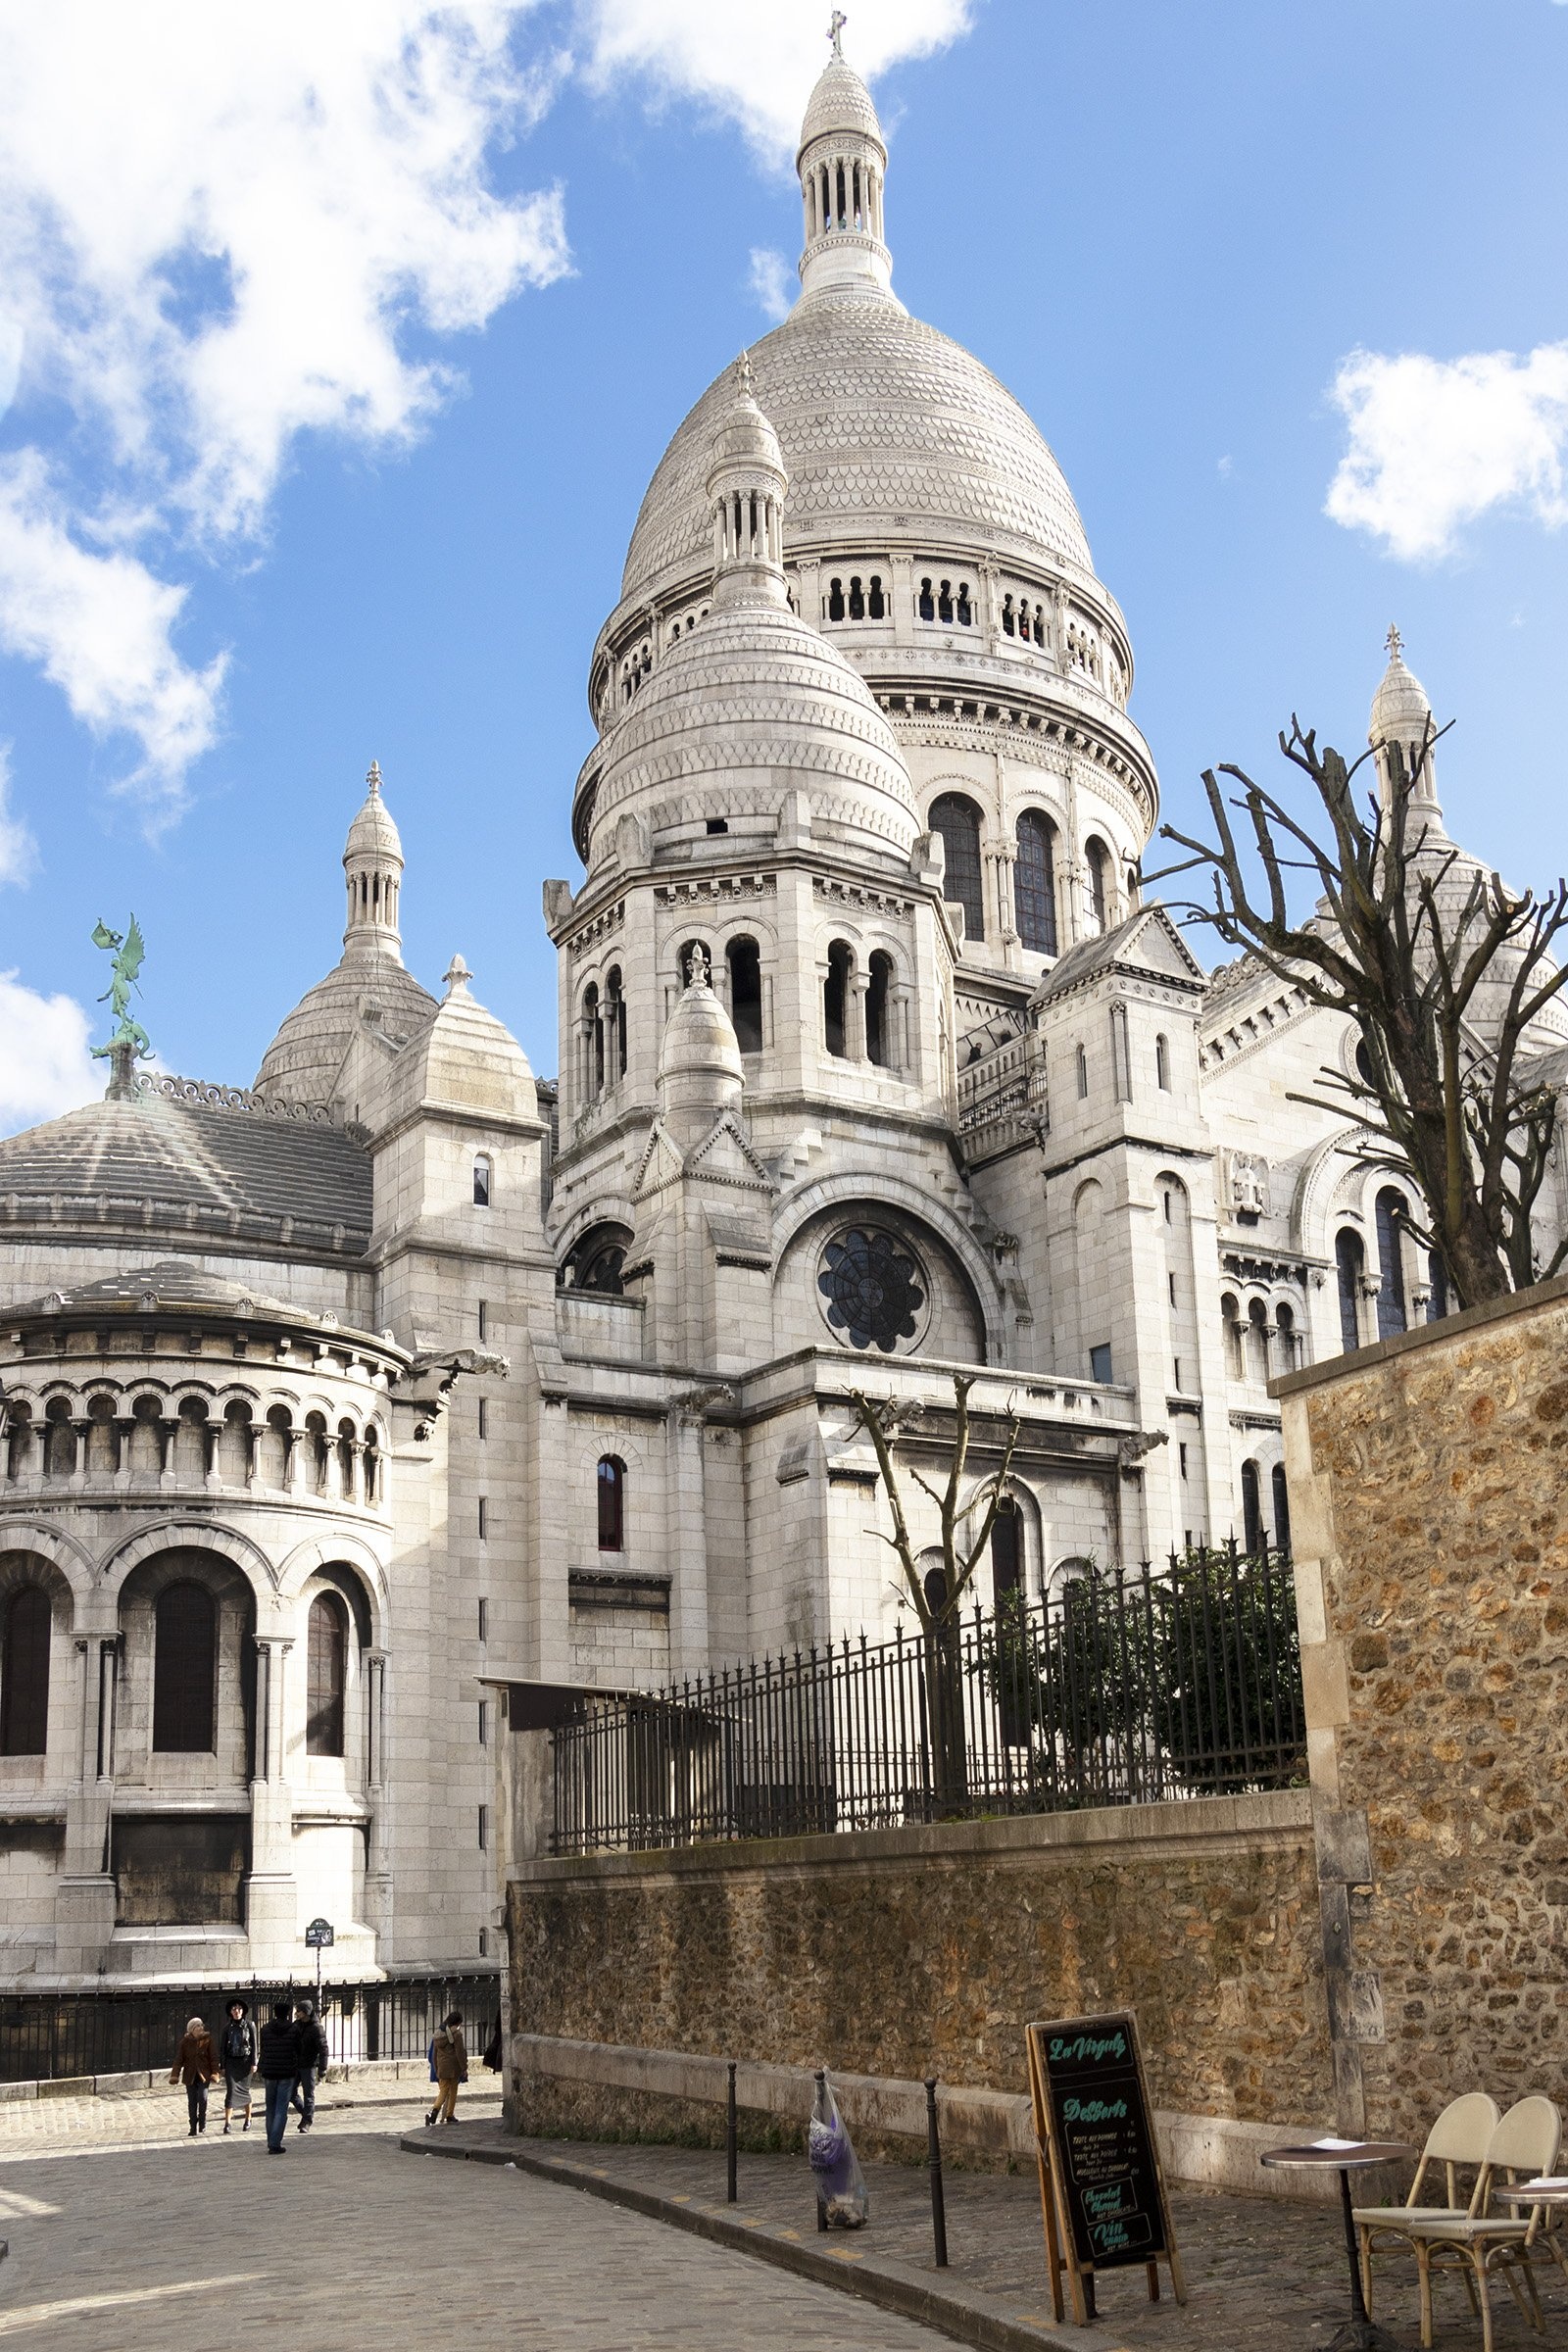 HD wallpaper, What To See In Montmartre, Travels, Paris Travel Guide, Blushrougette, 1600X2400 Hd Phone, Phone Hd Sacre Coeur Basilica Background